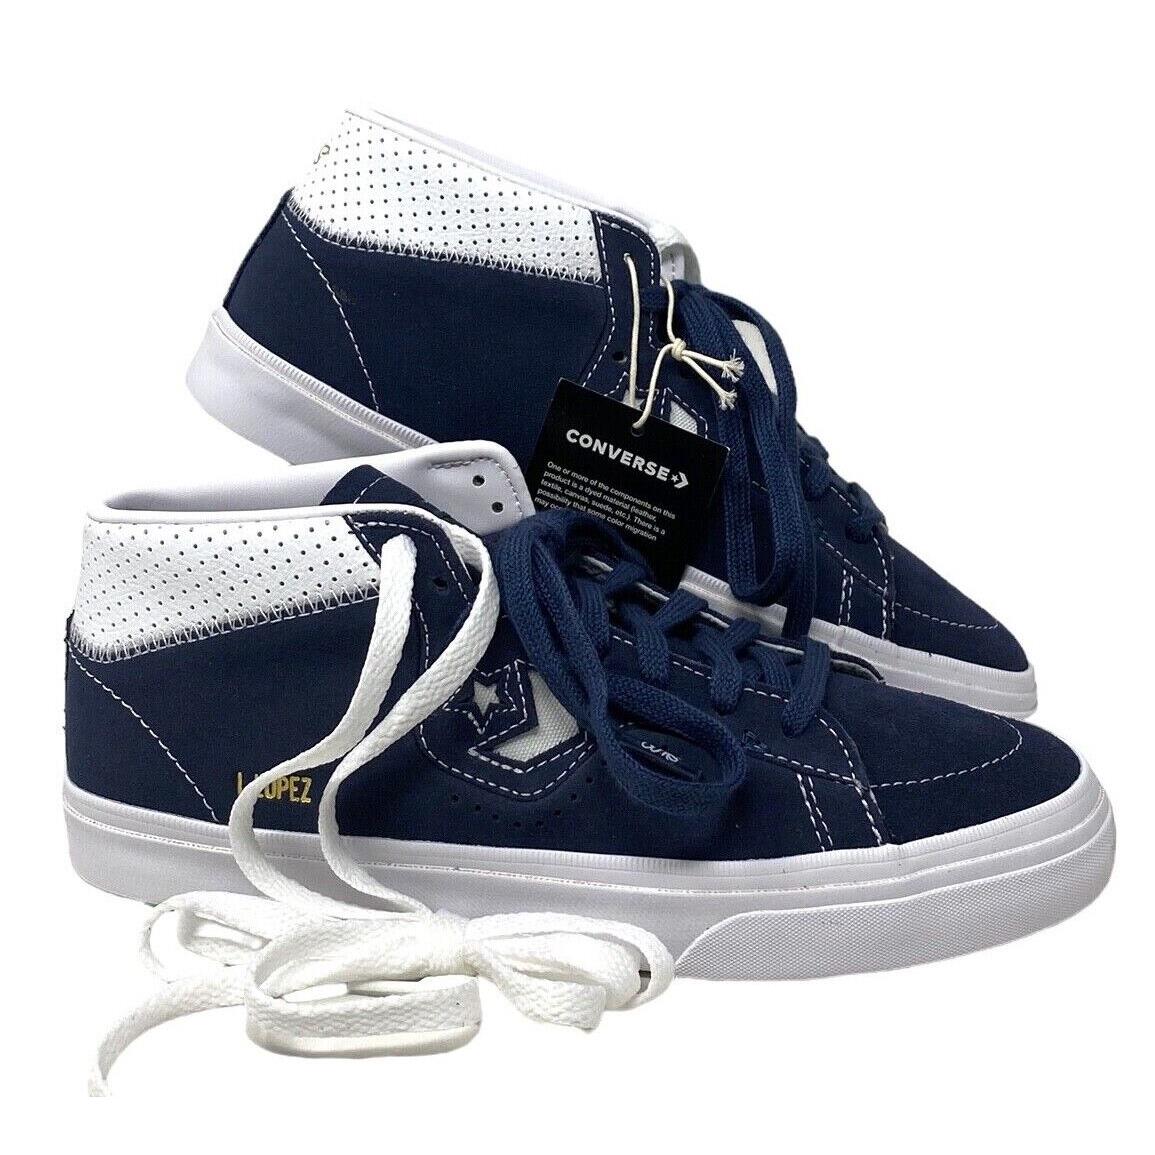 Converse Cons Louie Lopez Pro Suede Sneakers For Men Mid Top Navy White A06235C